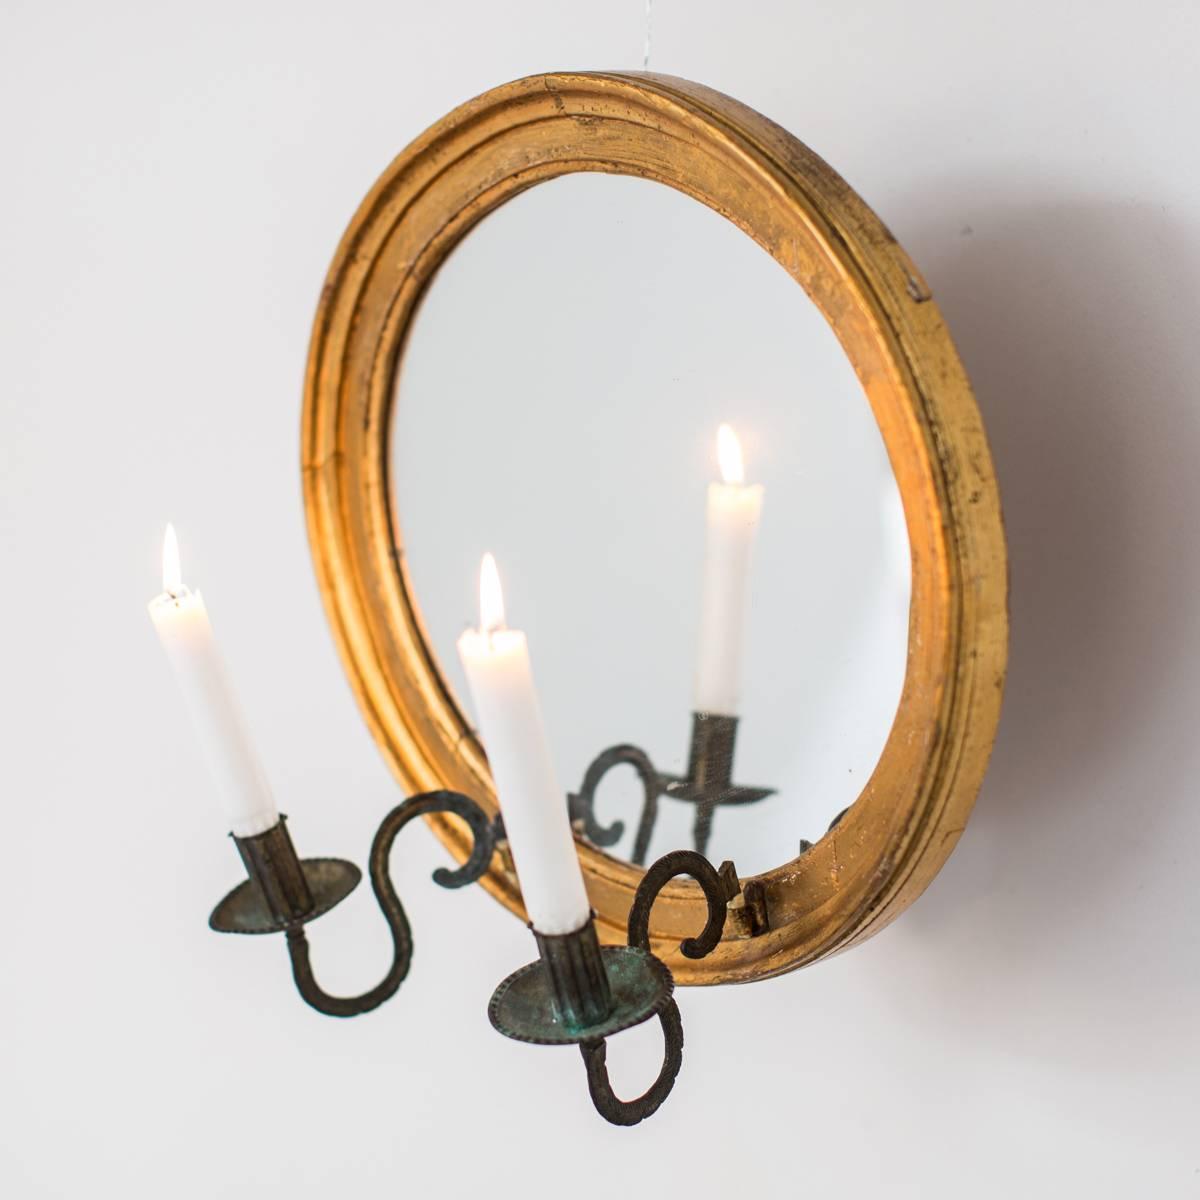 Wall sconce mirror oval giltwood French, 19th century, France. An oval mirrored wall sconce in giltwood made in France during the early 19th century. Two candleholders in oxidized copper. Original gilding and mirror glass.